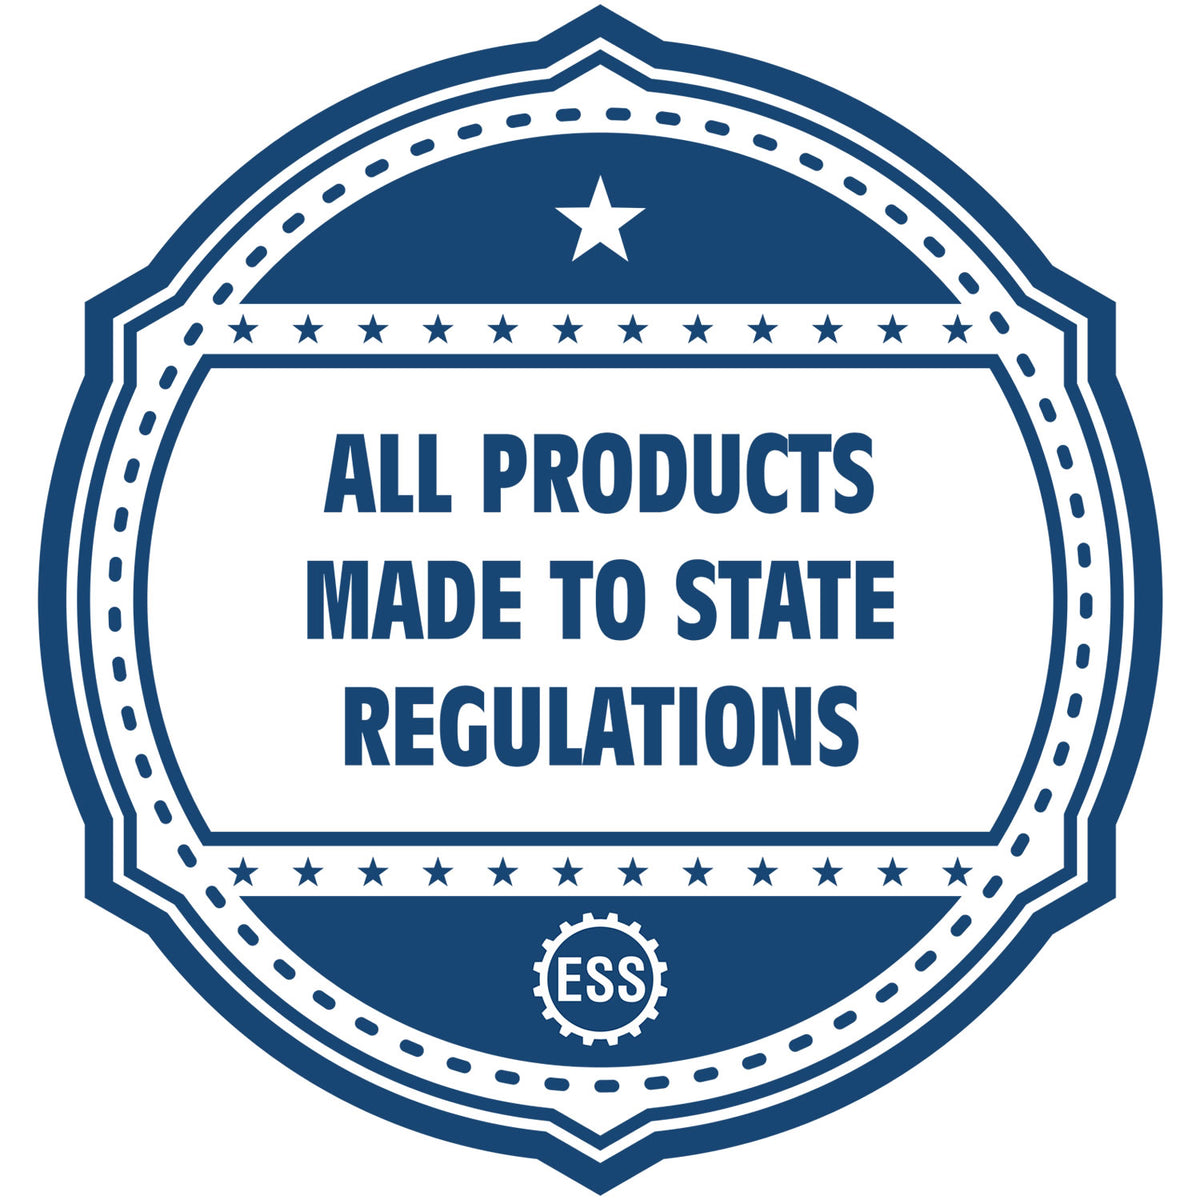 An icon or badge element for the Heavy Duty Cast Iron Delaware Engineer Seal Embosser showing that this product is made in compliance with state regulations.